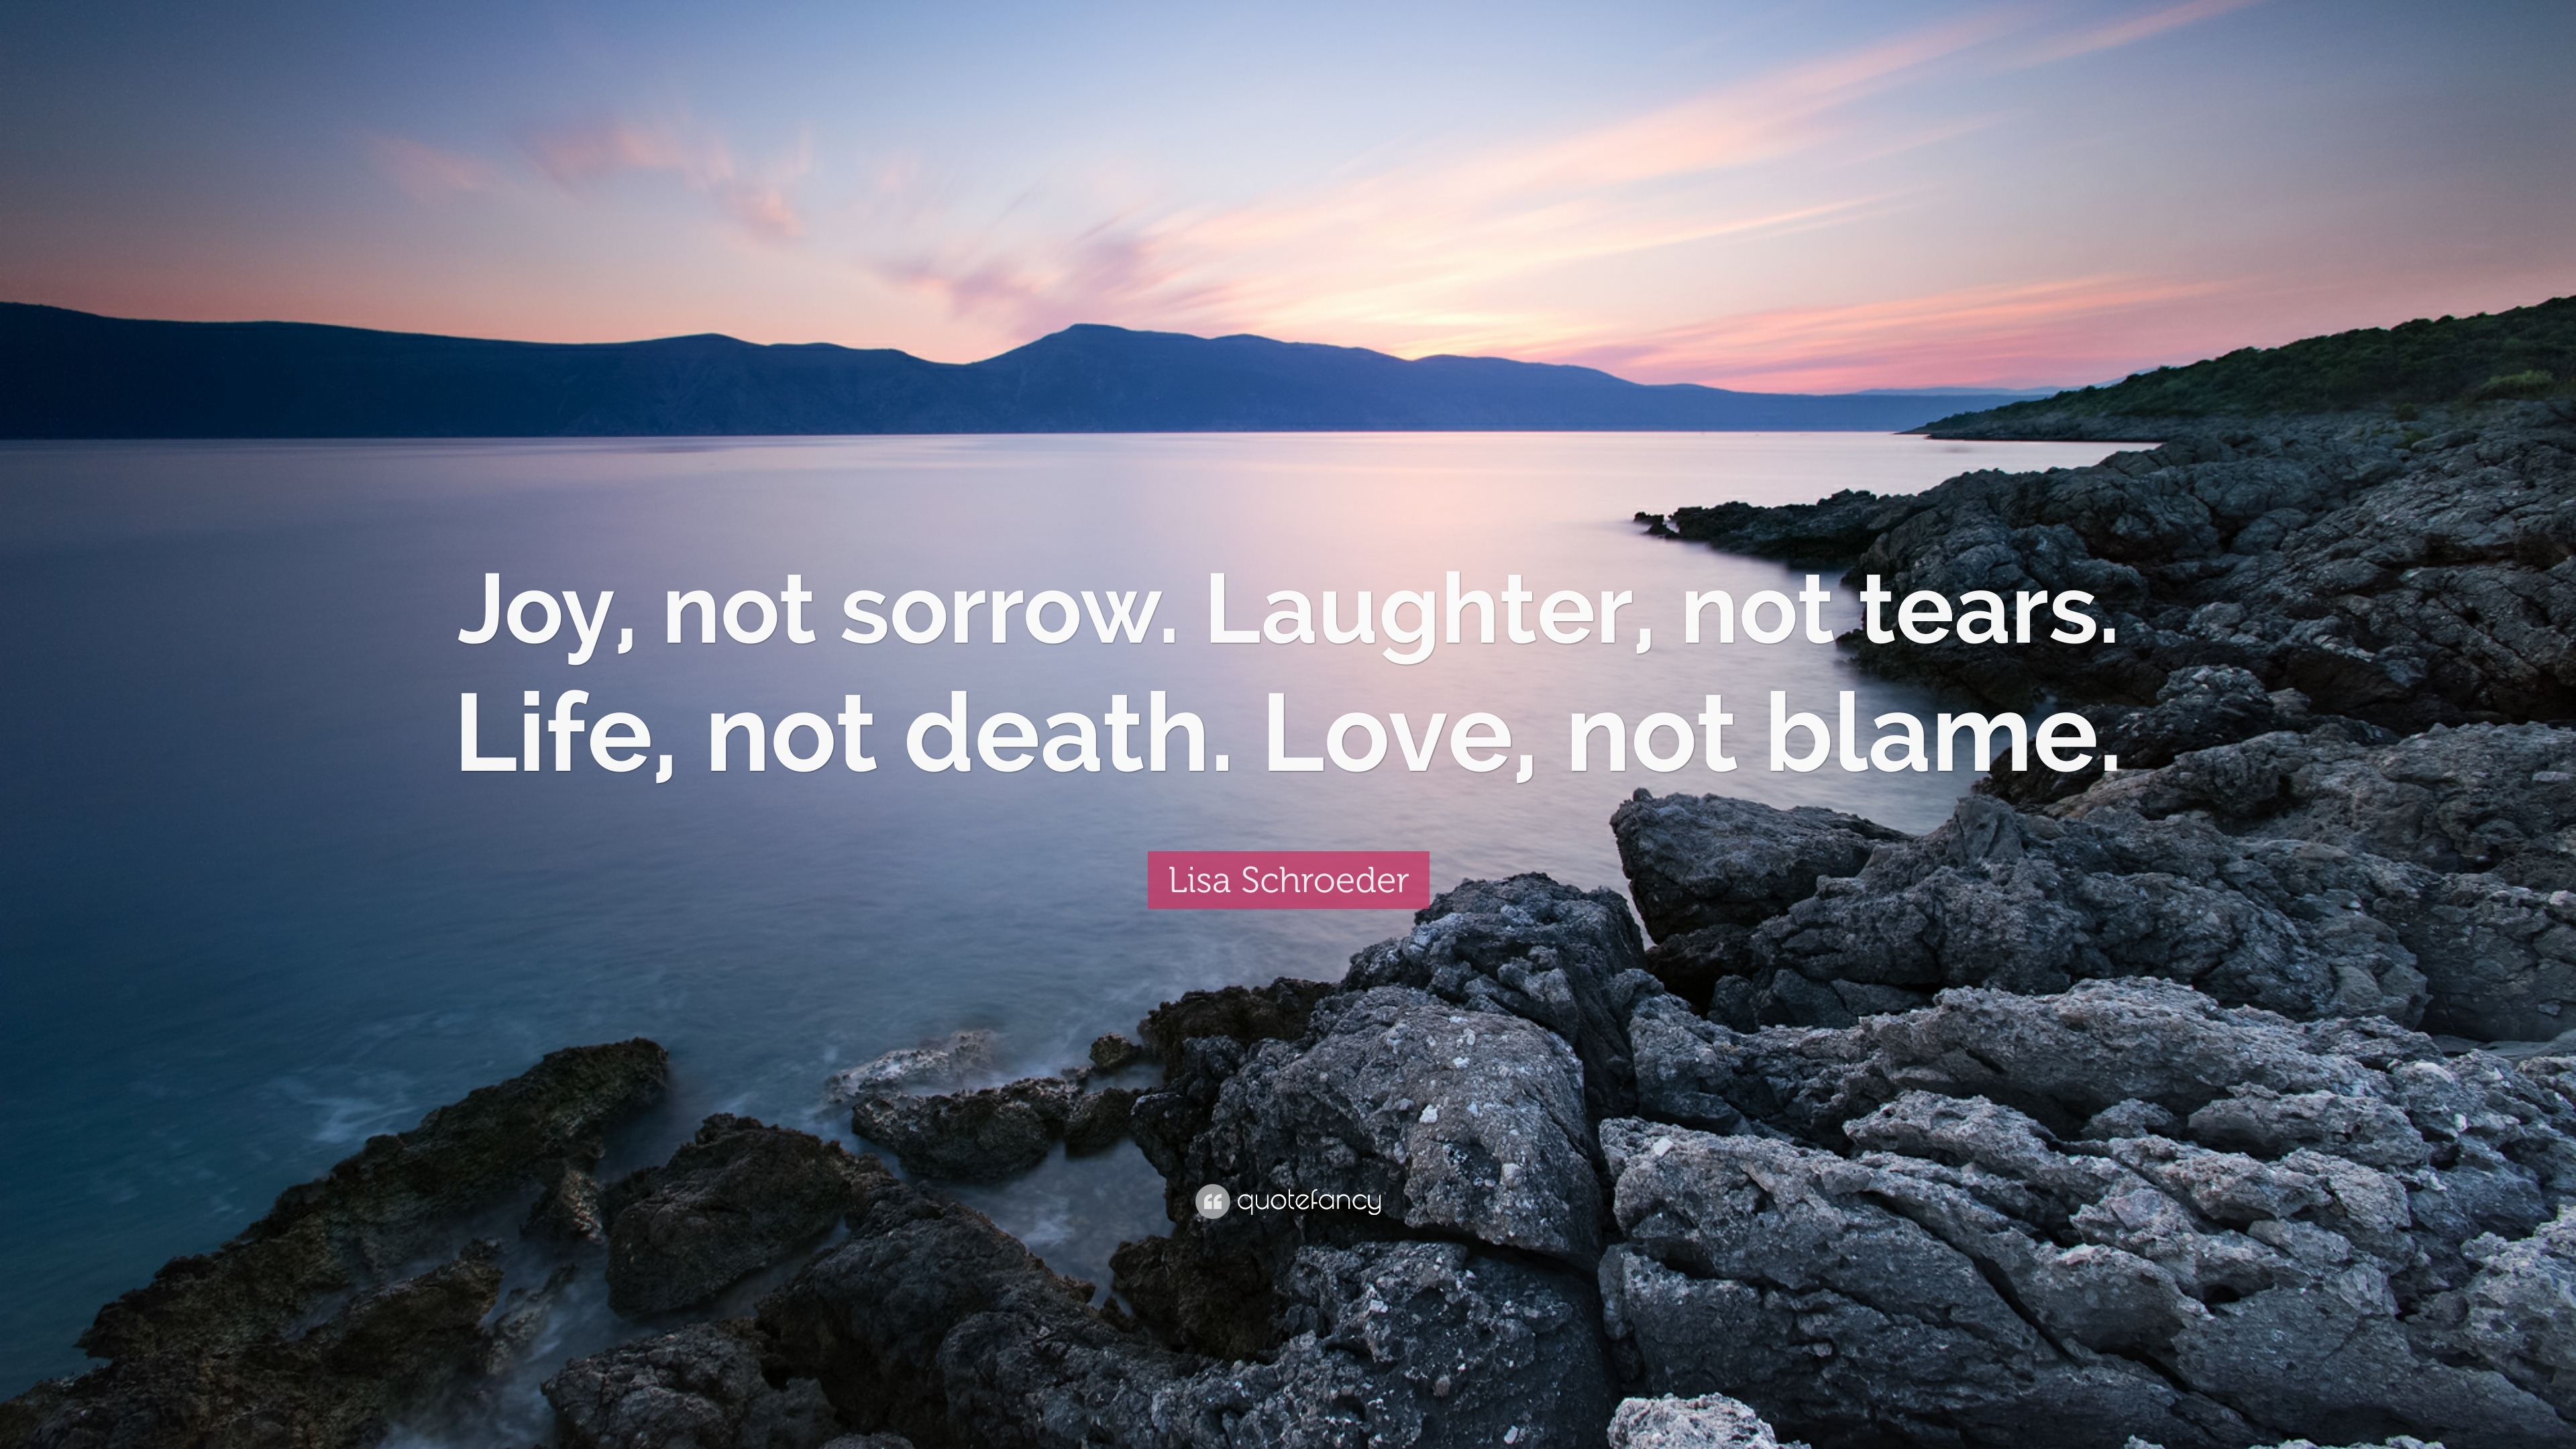 Lisa Schroeder Quote “Joy not sorrow Laughter not tears Life